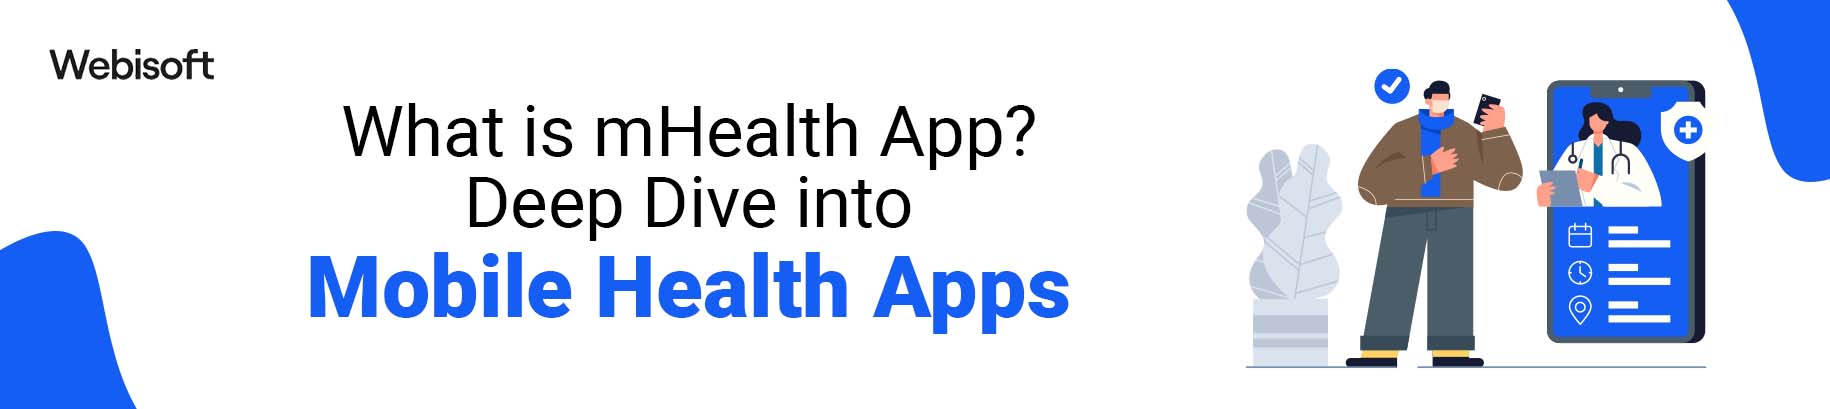 what is mhealth app